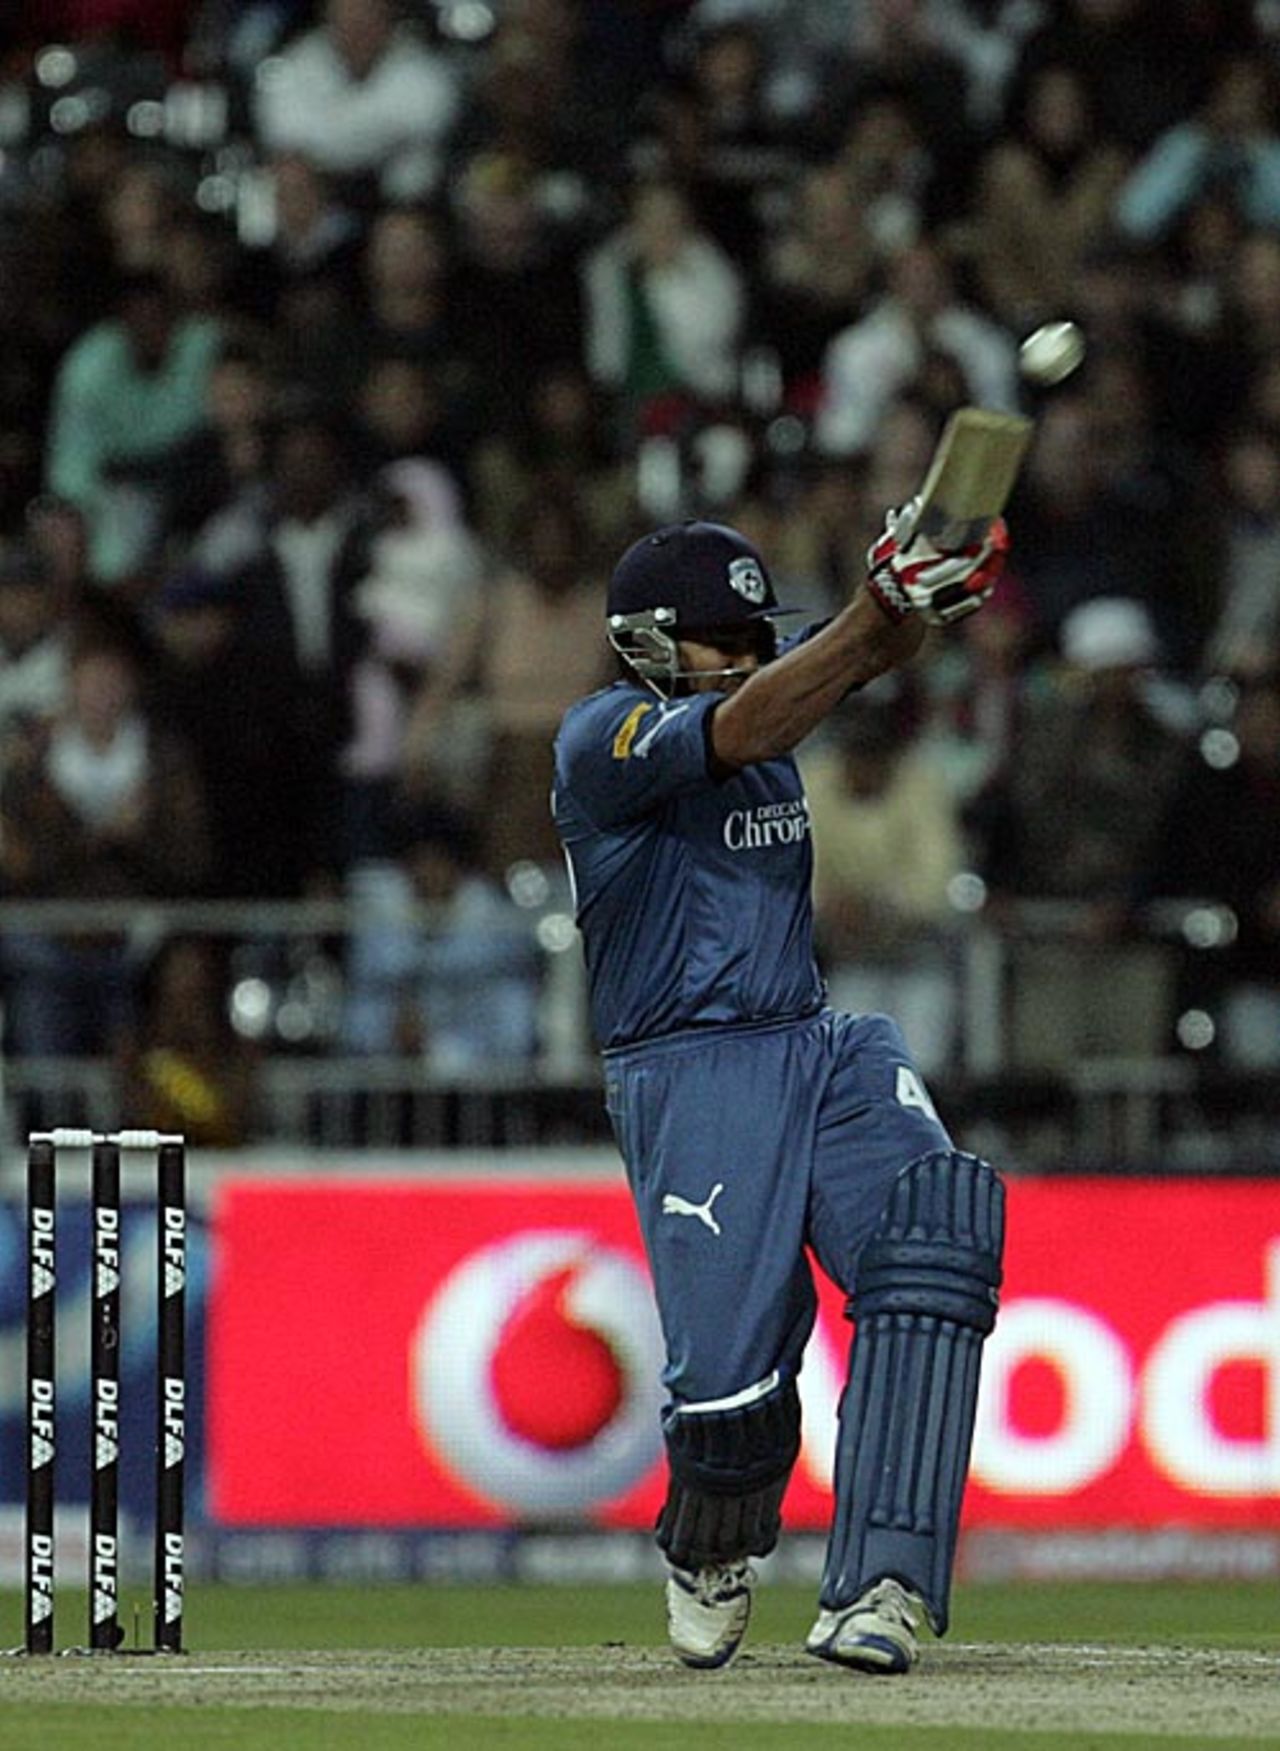 Rohit Sharma delivers the final blow, Deccan Chargers v Kolkata Knight Riders, IPL, Johannesburg, May 16, 2009 